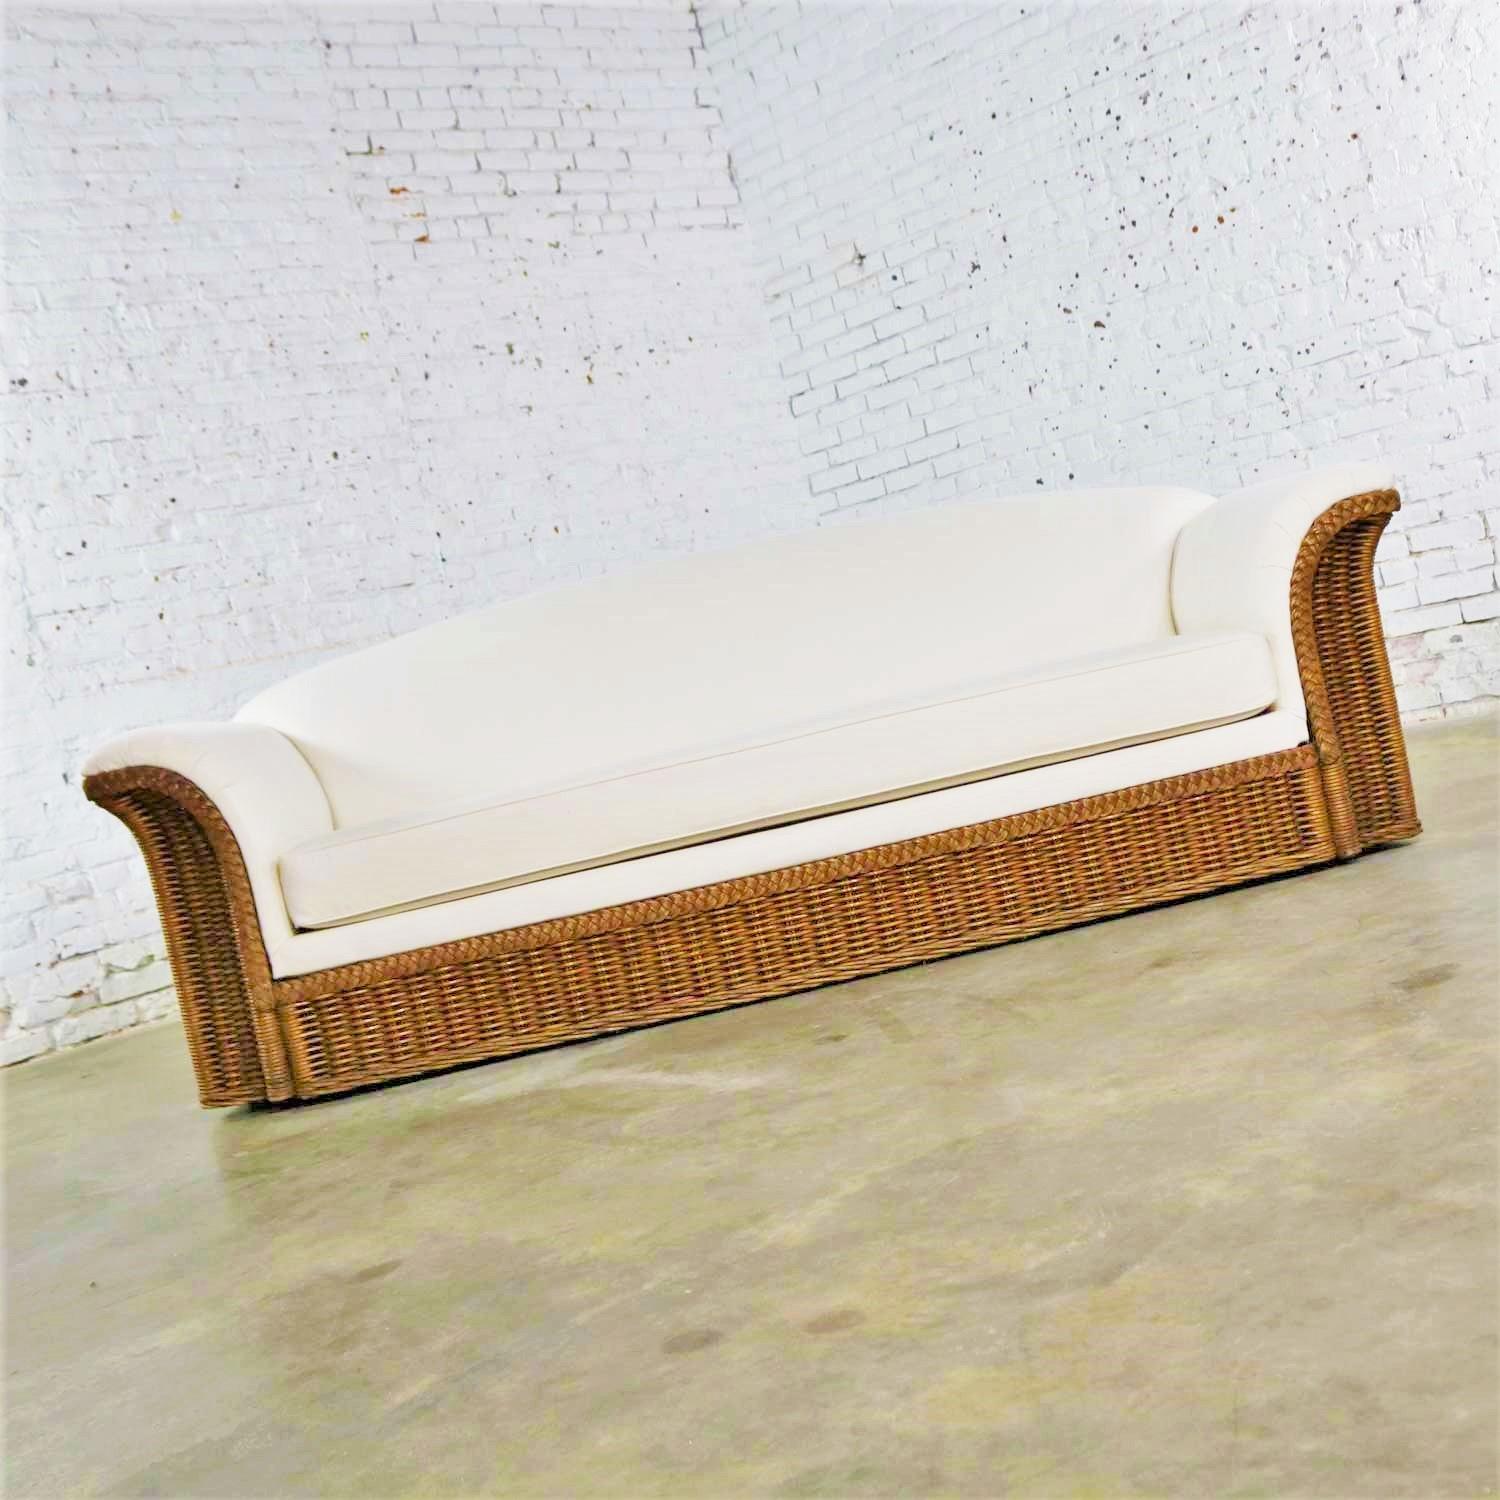 Vintage Modern Wicker Sofa Manner Michael Taylor in New White Canvas 3